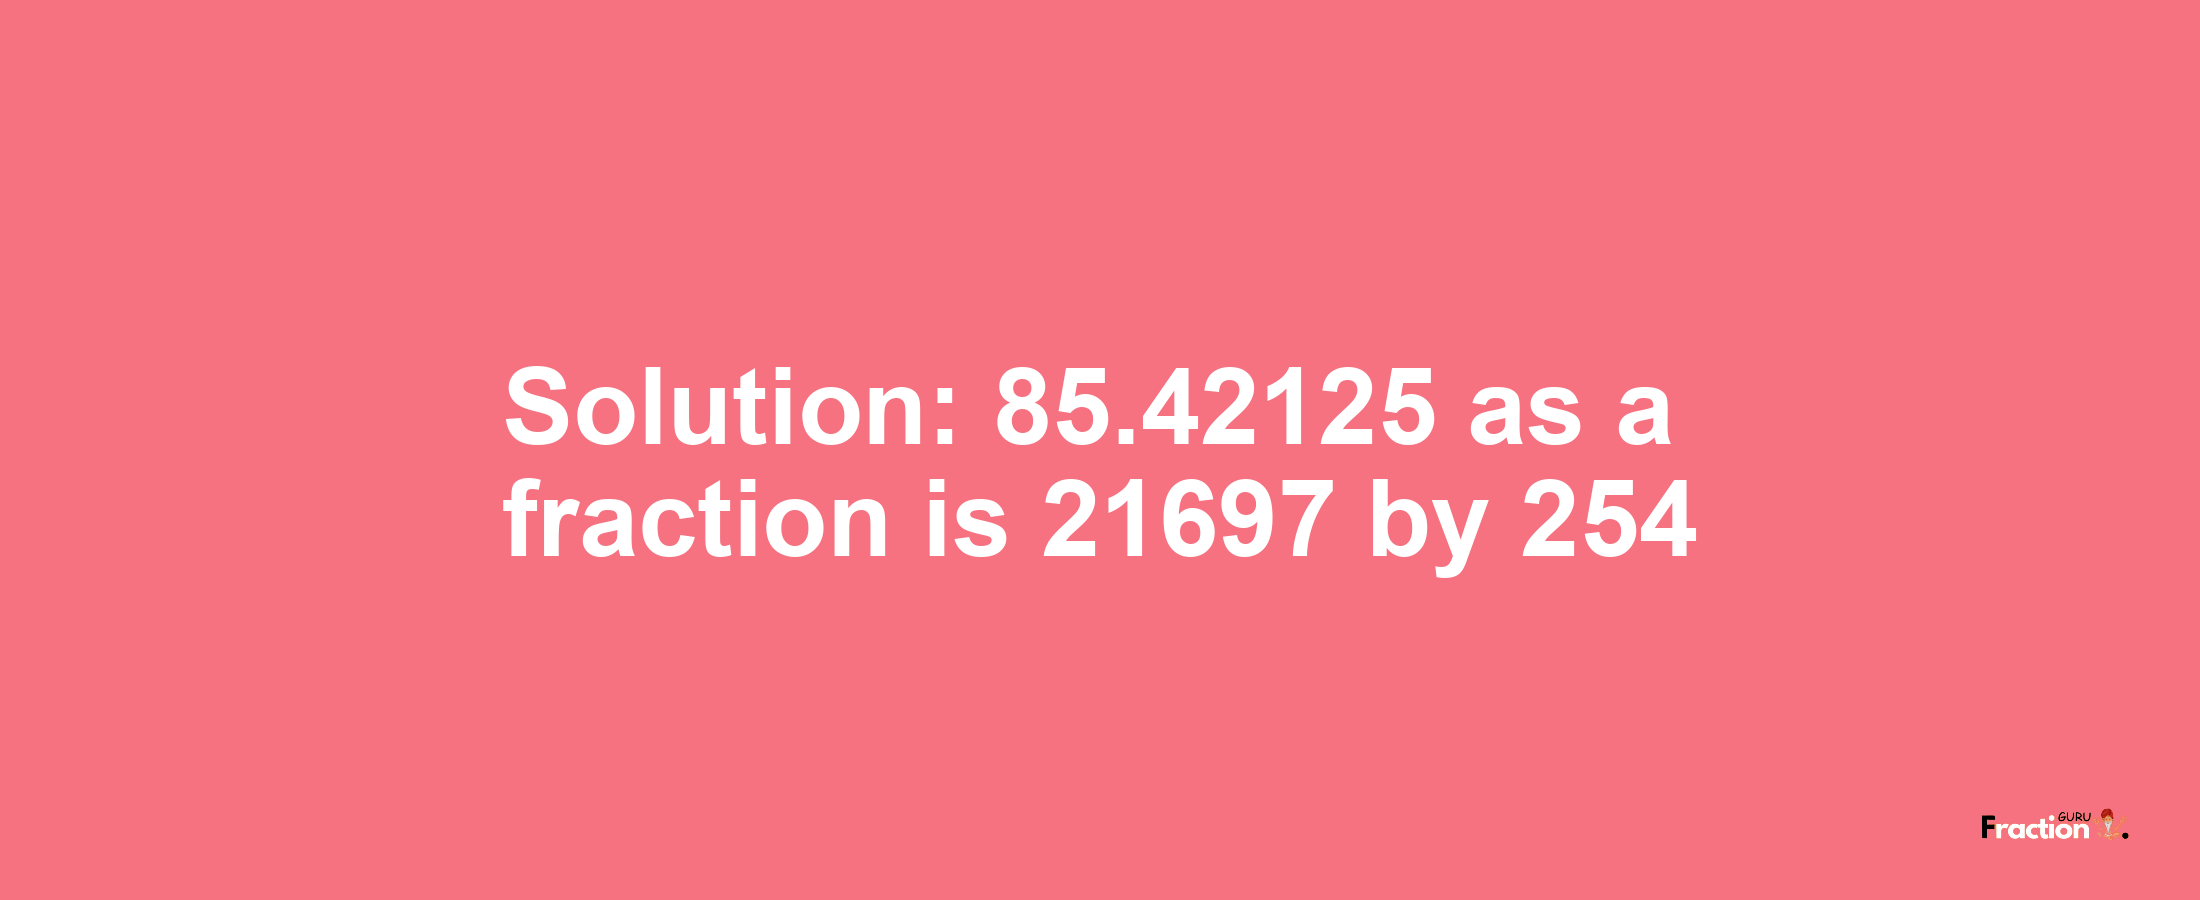 Solution:85.42125 as a fraction is 21697/254